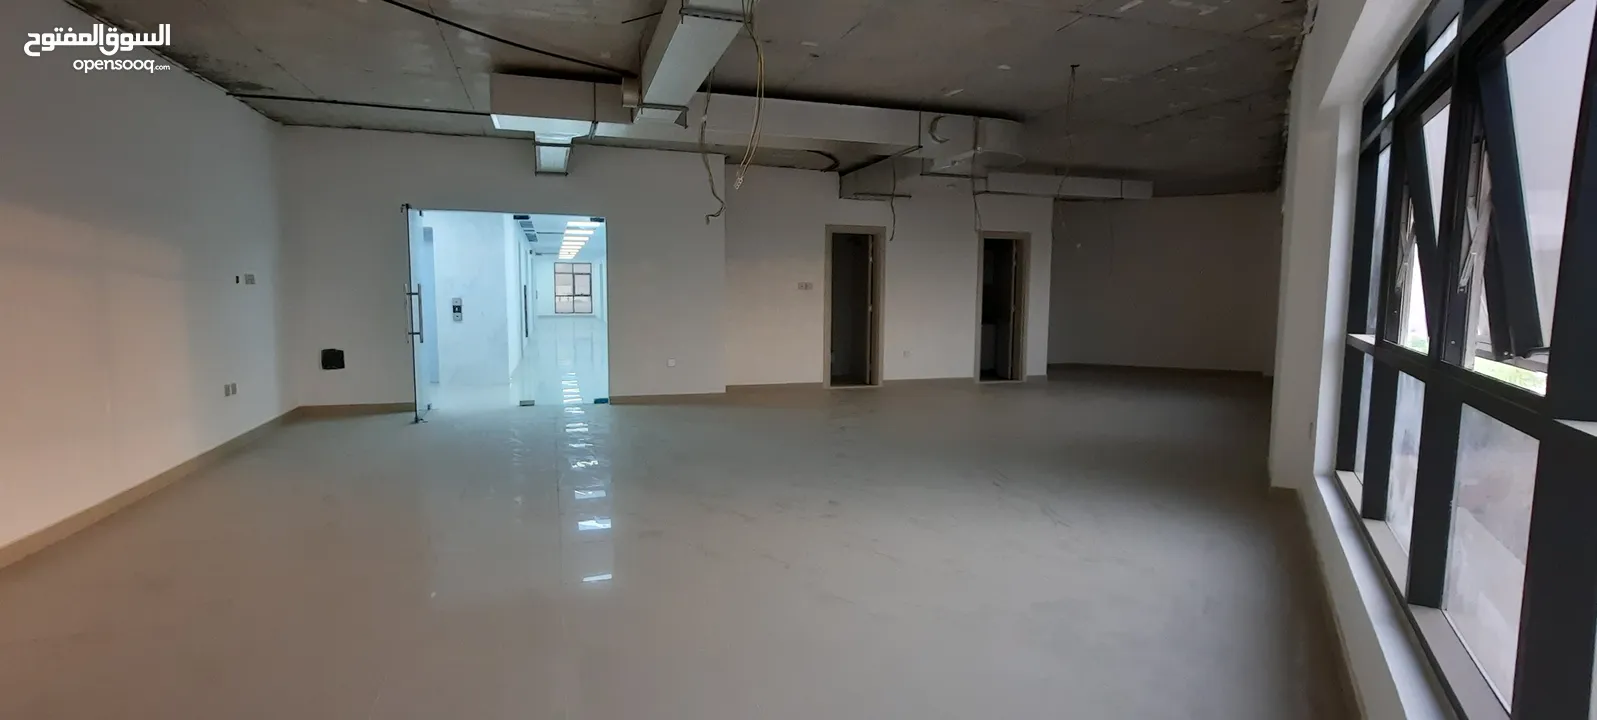 100 Sqm 2nd floor Office for Rent - Muhalab Towers, Ansab near Expressway